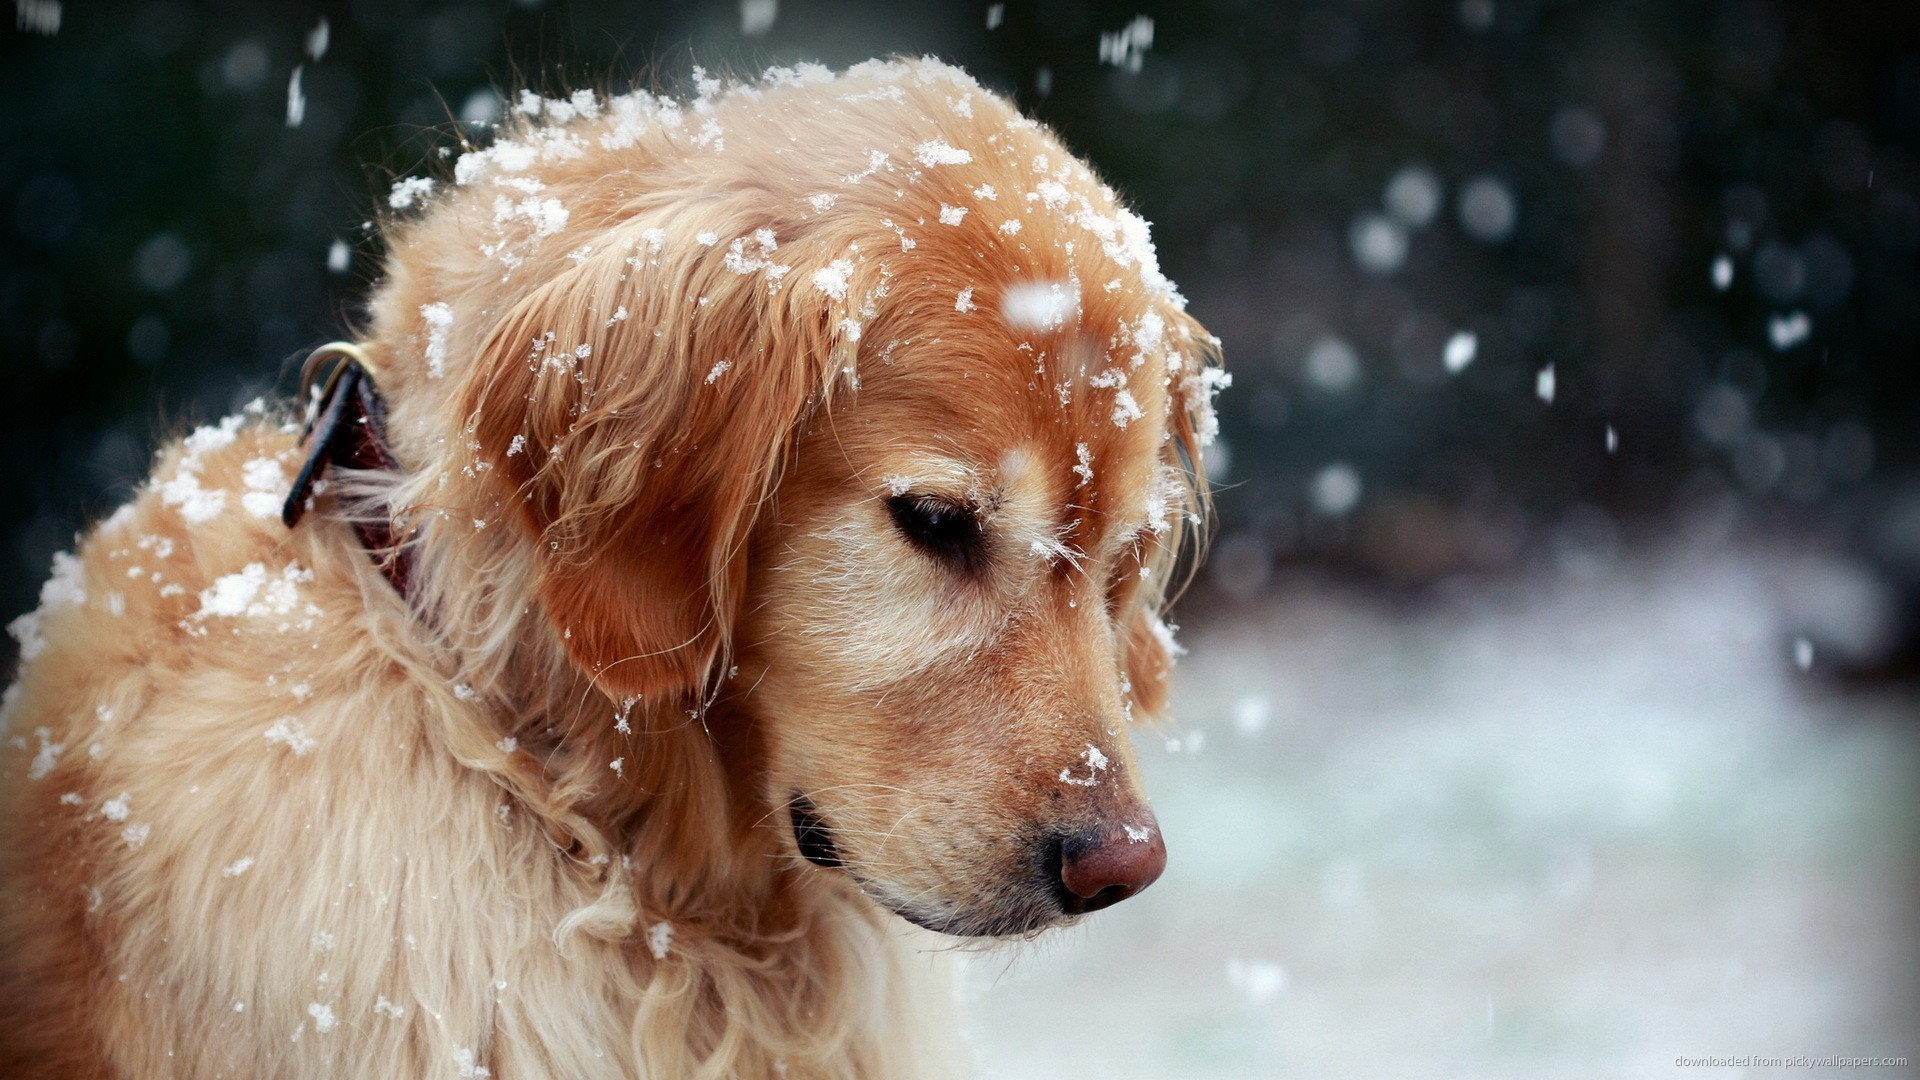 Golden Retriever In The Snow Wallpaper Screensaver For Kindle3 And Dx